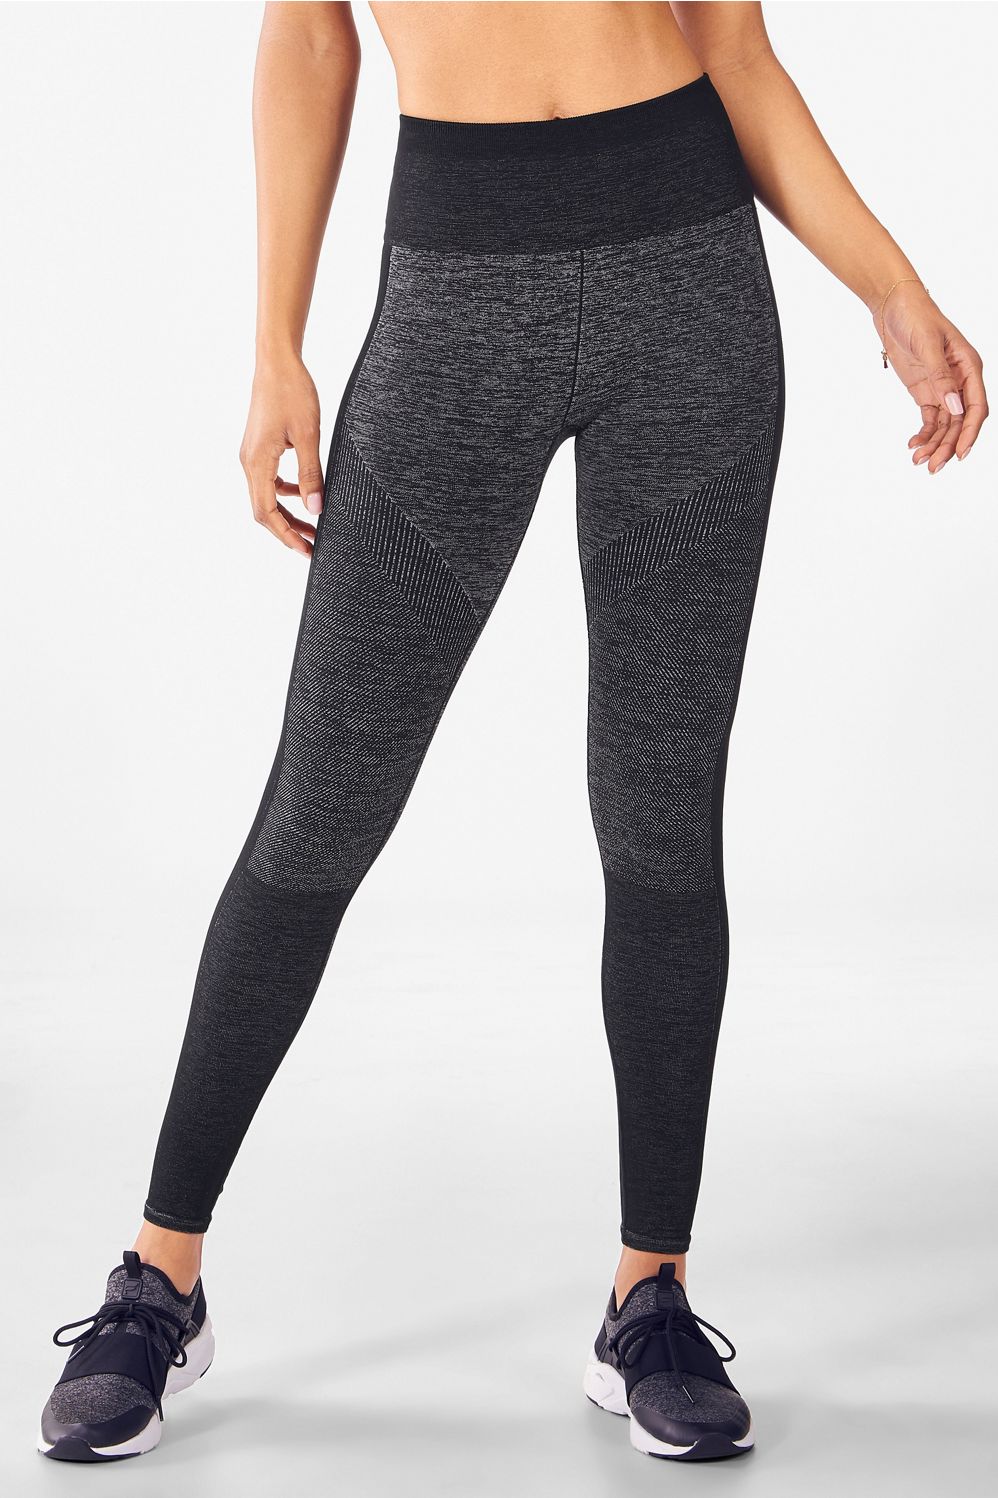 Fabletics Fabletic Leggings Gray Size XXS - $11 (84% Off Retail) - From  Reese